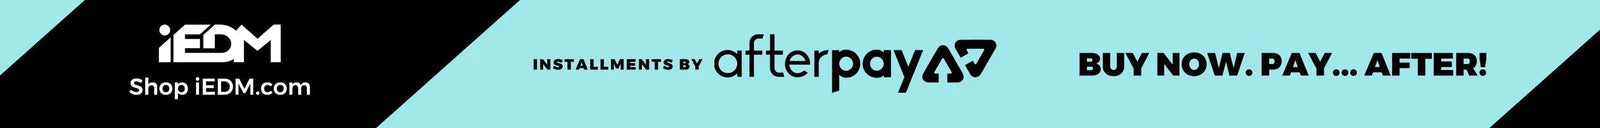 Afterpay Banner